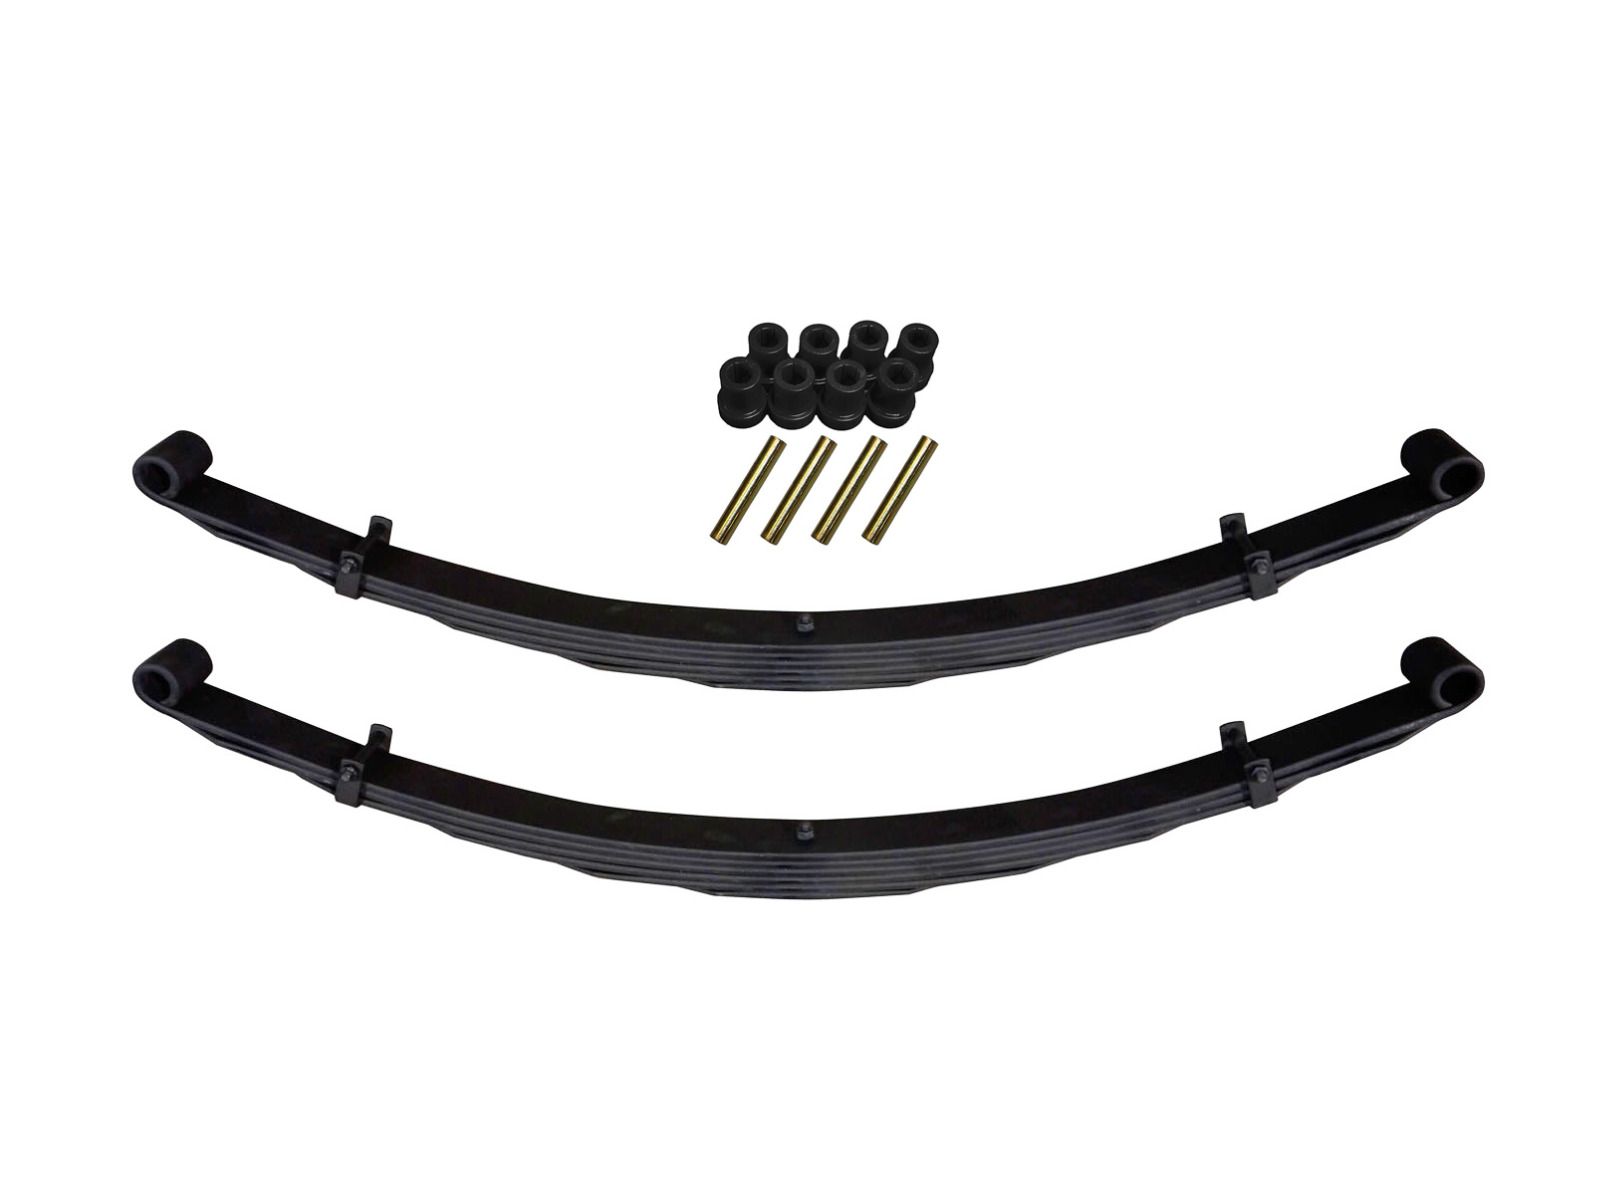 F250 1977-1979 Ford 4wd (Low Boy) - Front 4" Lift Leaf Spring Kit (with bushings) by Skyjacker